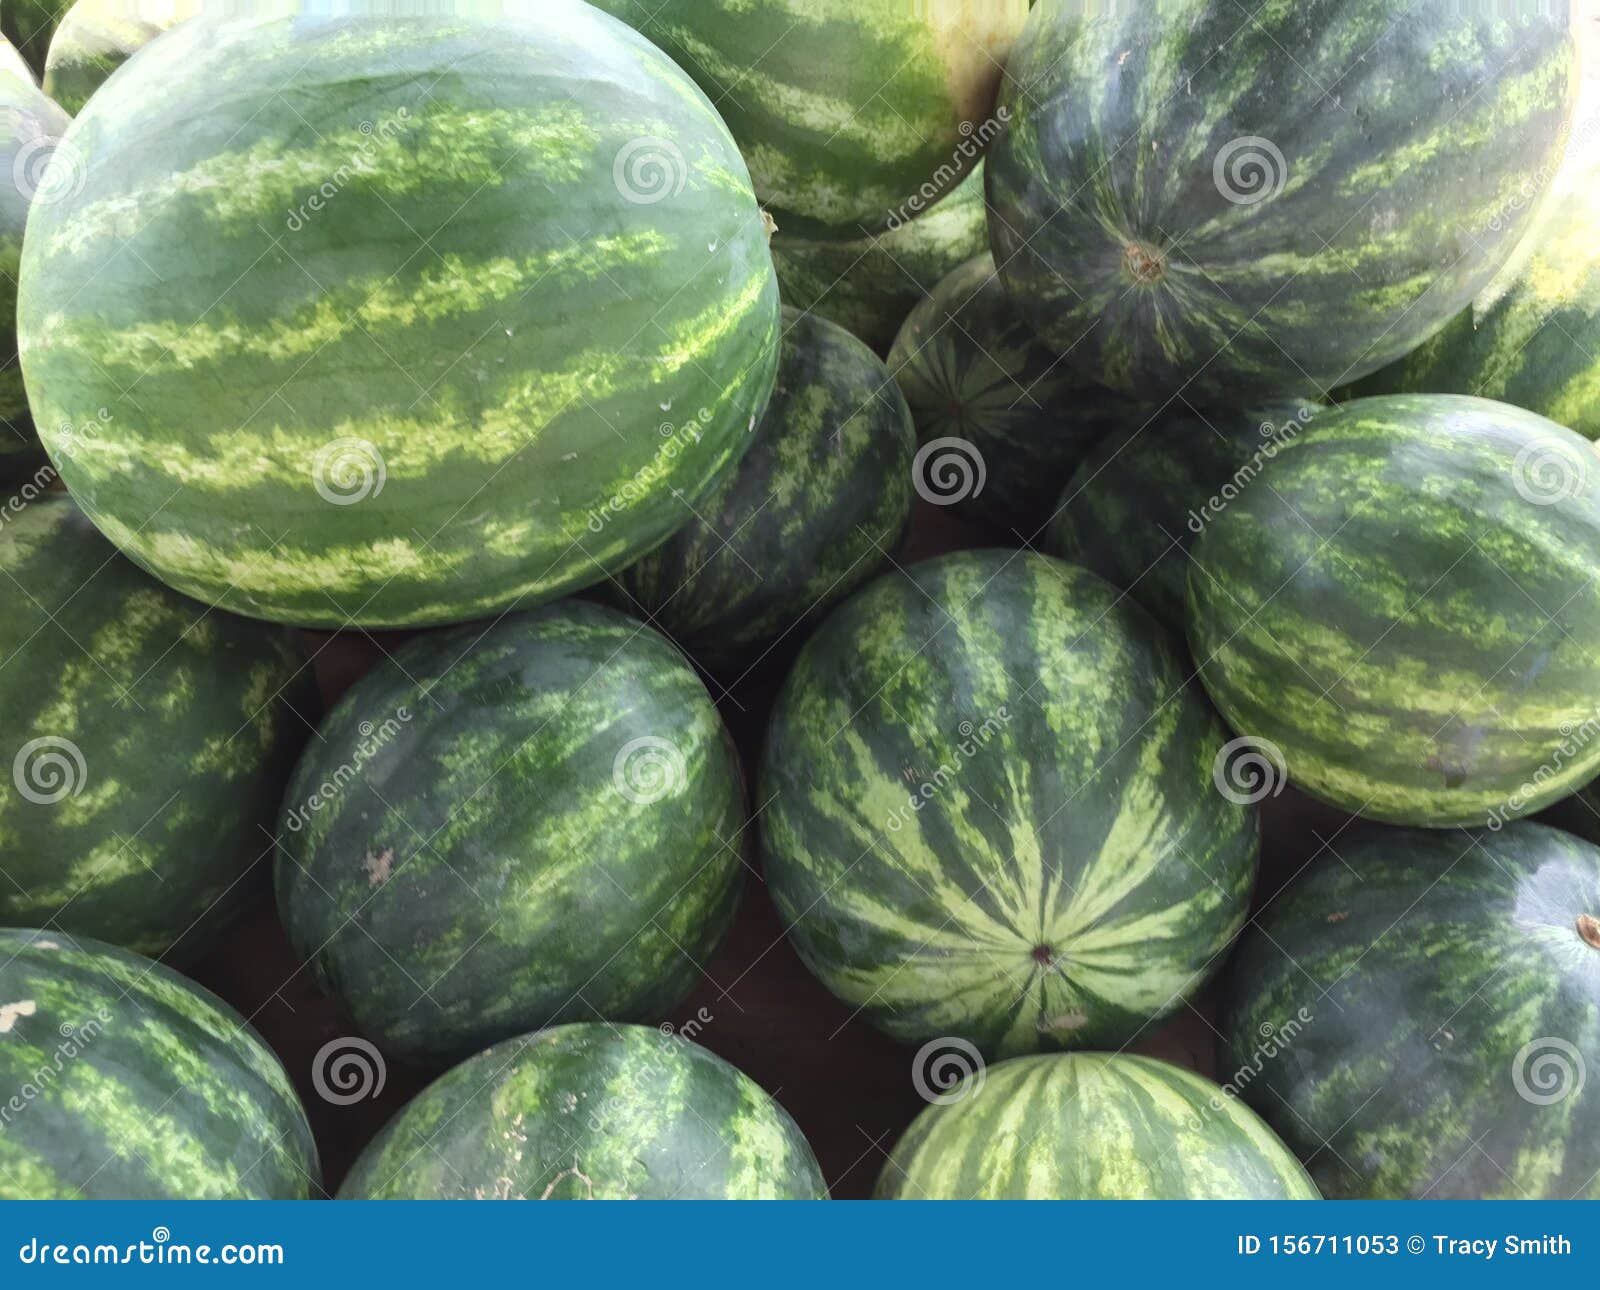 Whole Sized Green Watermelons In Bin At Farm Stand. Royalty-Free Stock ...